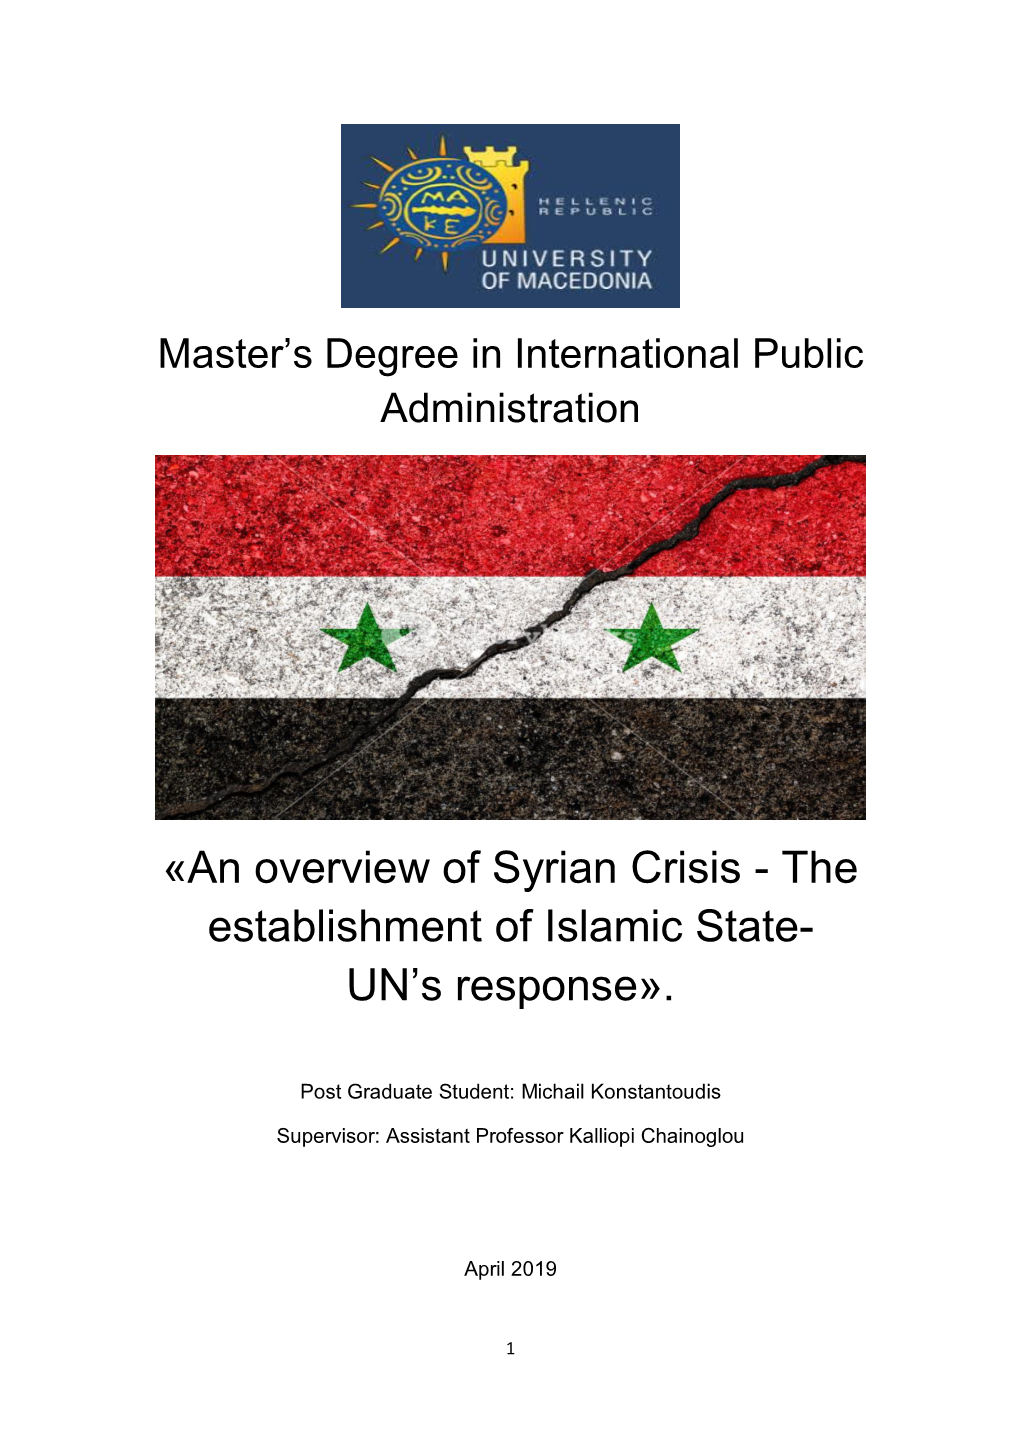 «An Overview of Syrian Crisis - the Establishment of Islamic State- UN’S Response»